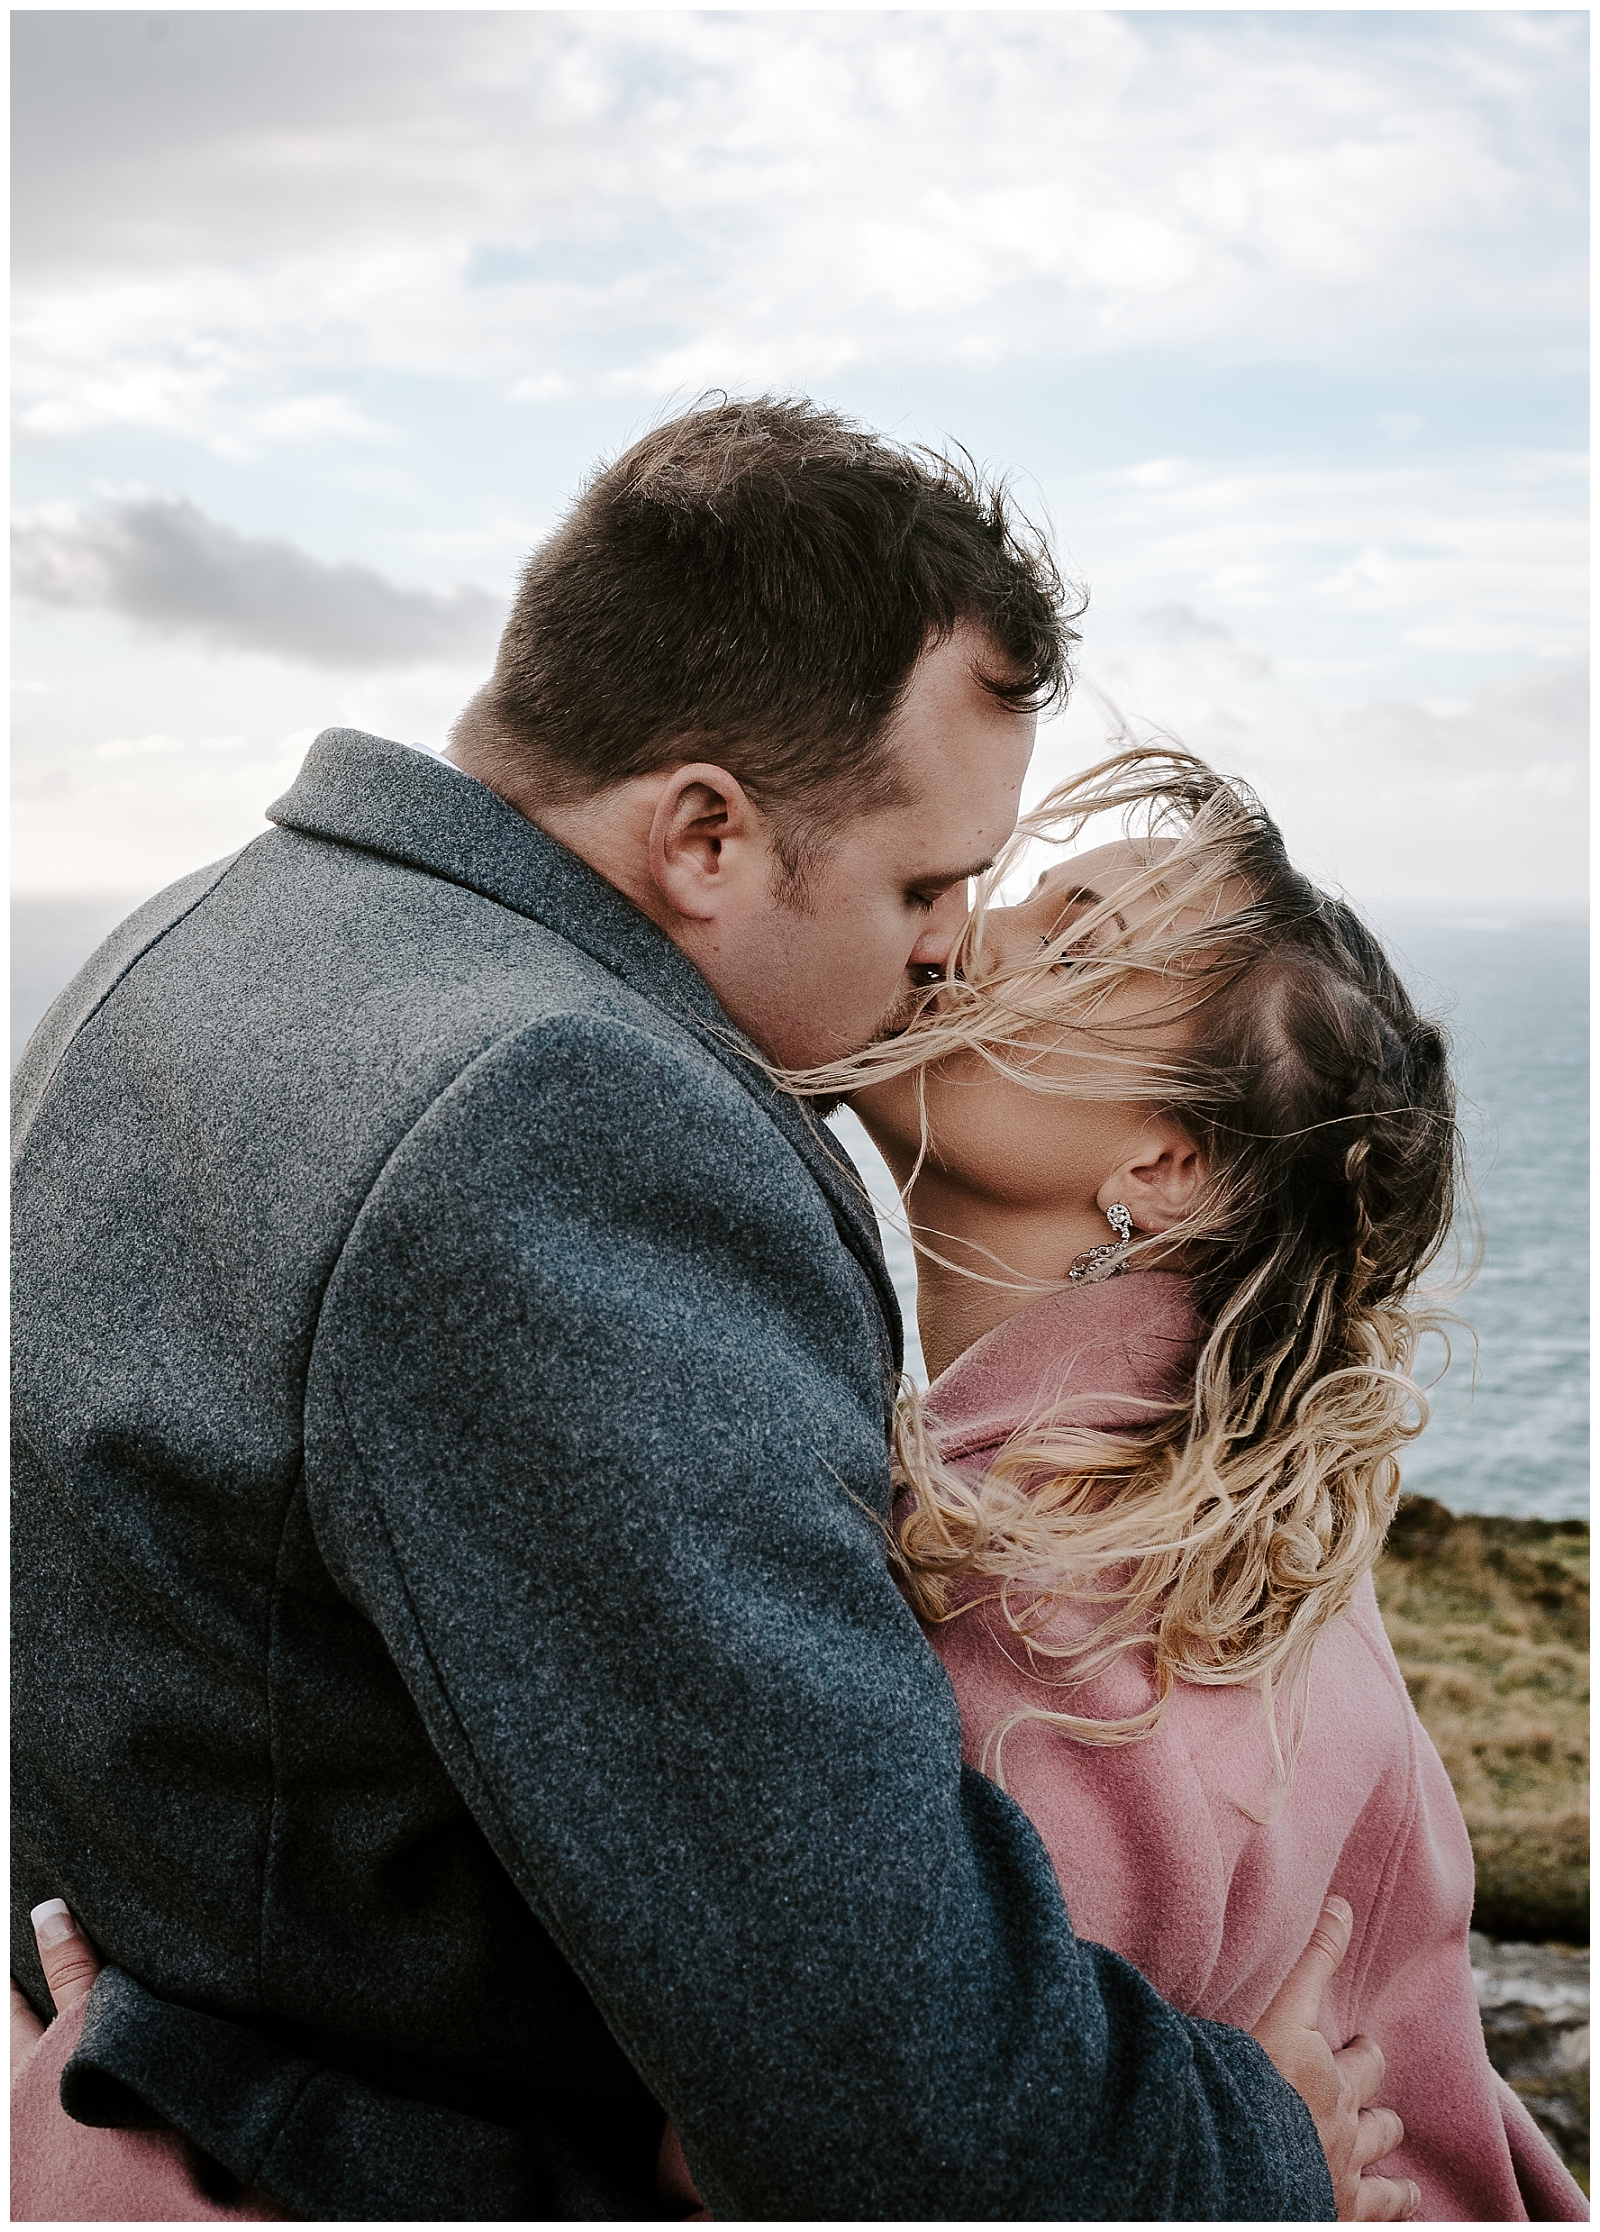 ireland elopement photographer takes pictures as a couple elopes in Ireland